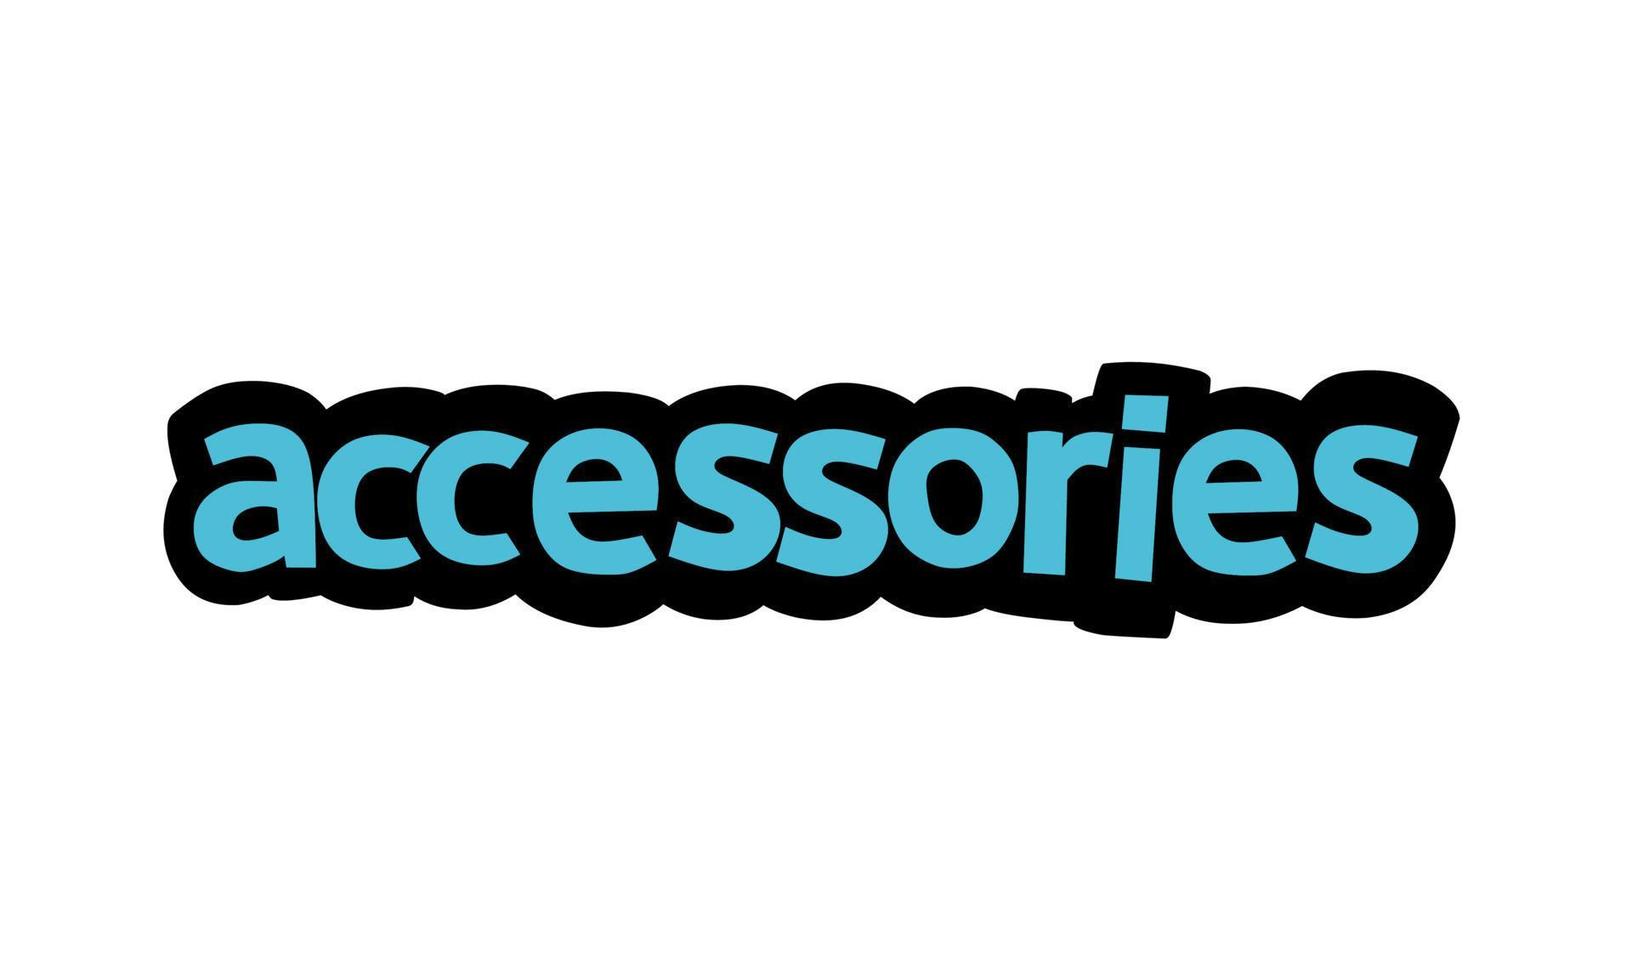 ACCESSORIES writing vector design on white background